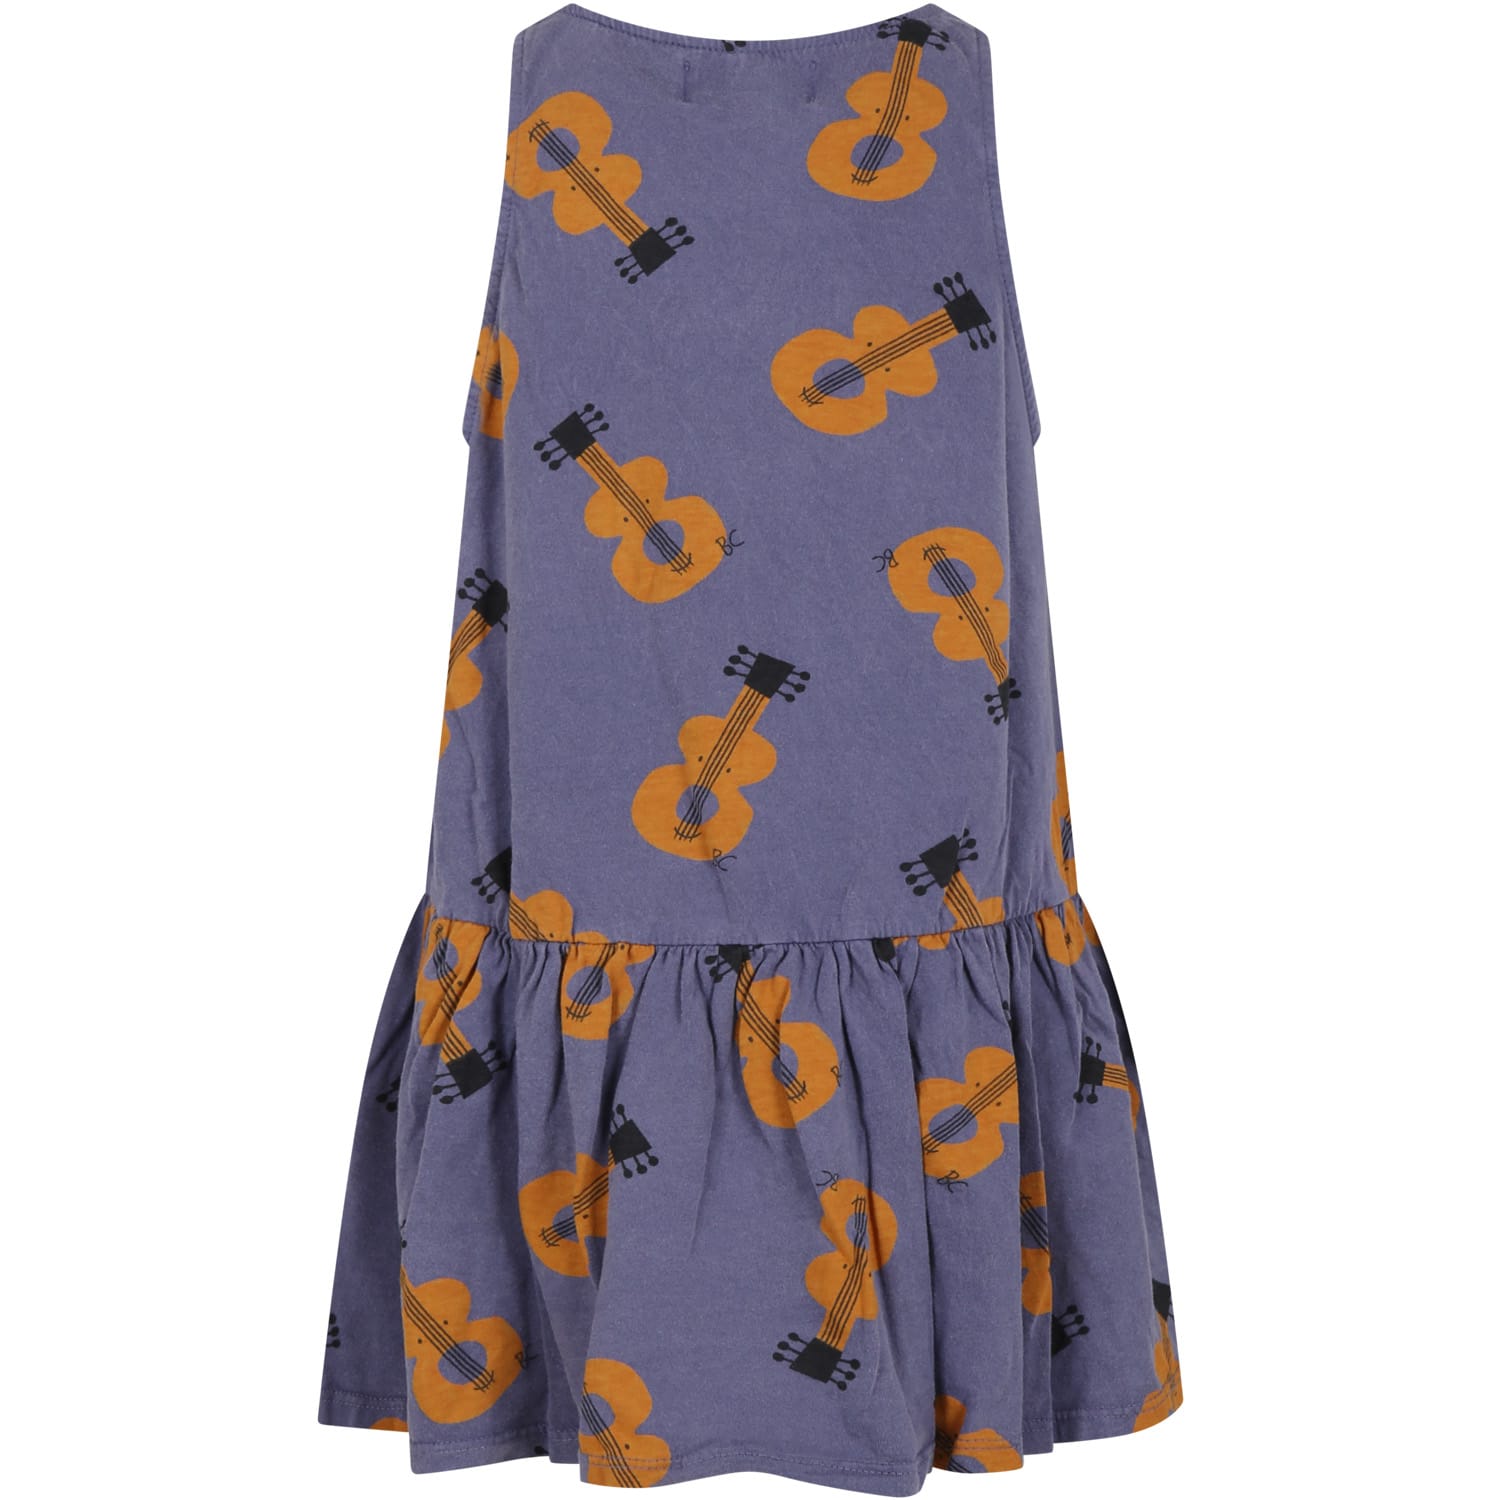 Shop Bobo Choses Purple Dress For Girl With Guitars In Violet